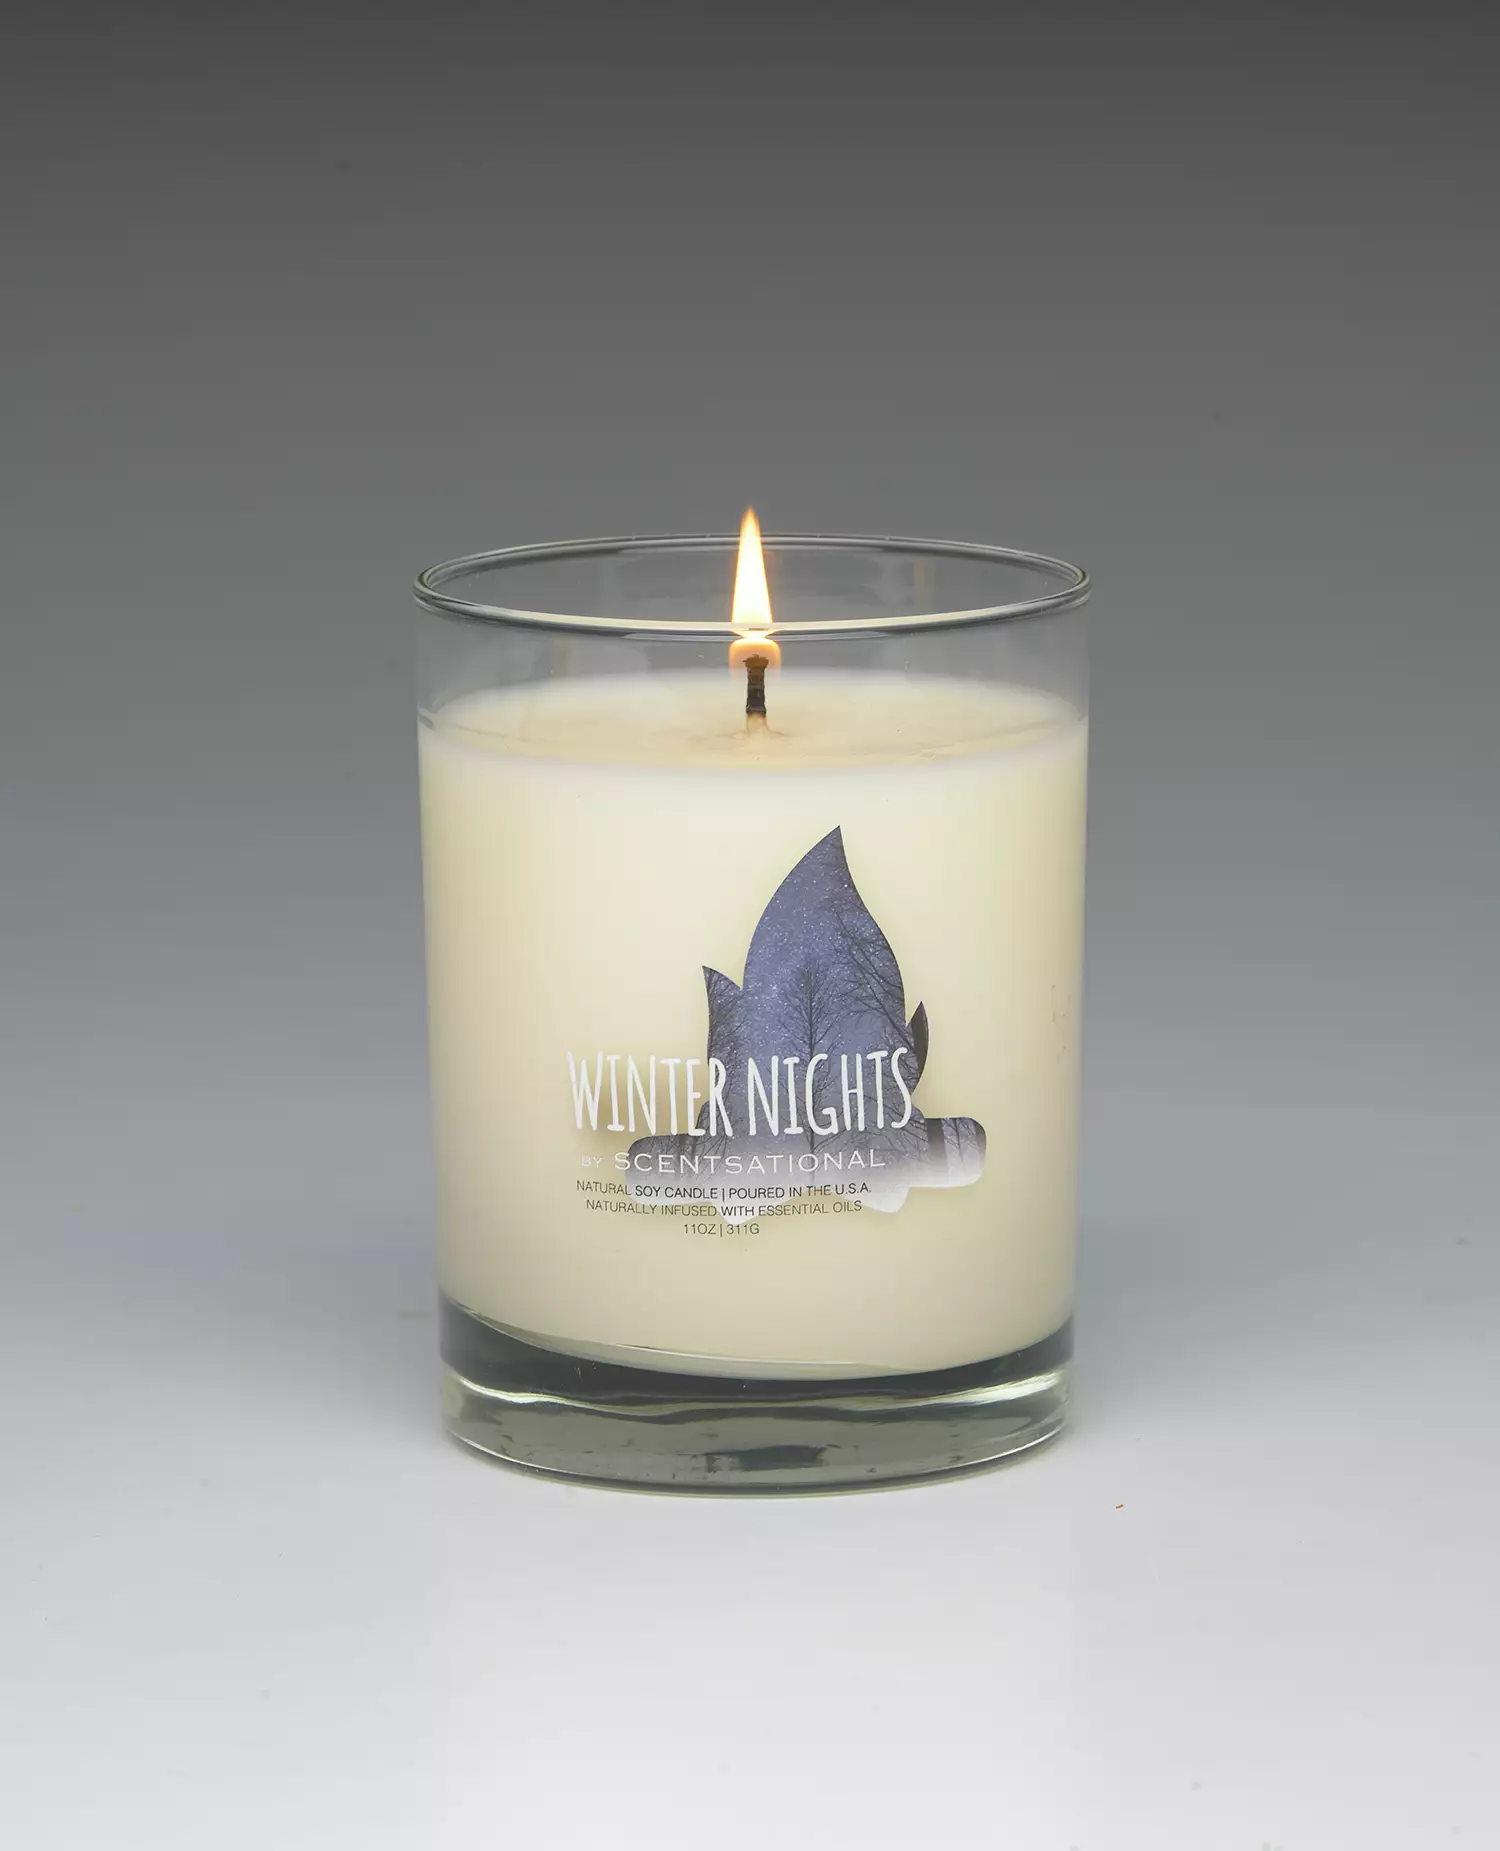 Winter Nights – 11oz scented candle burning